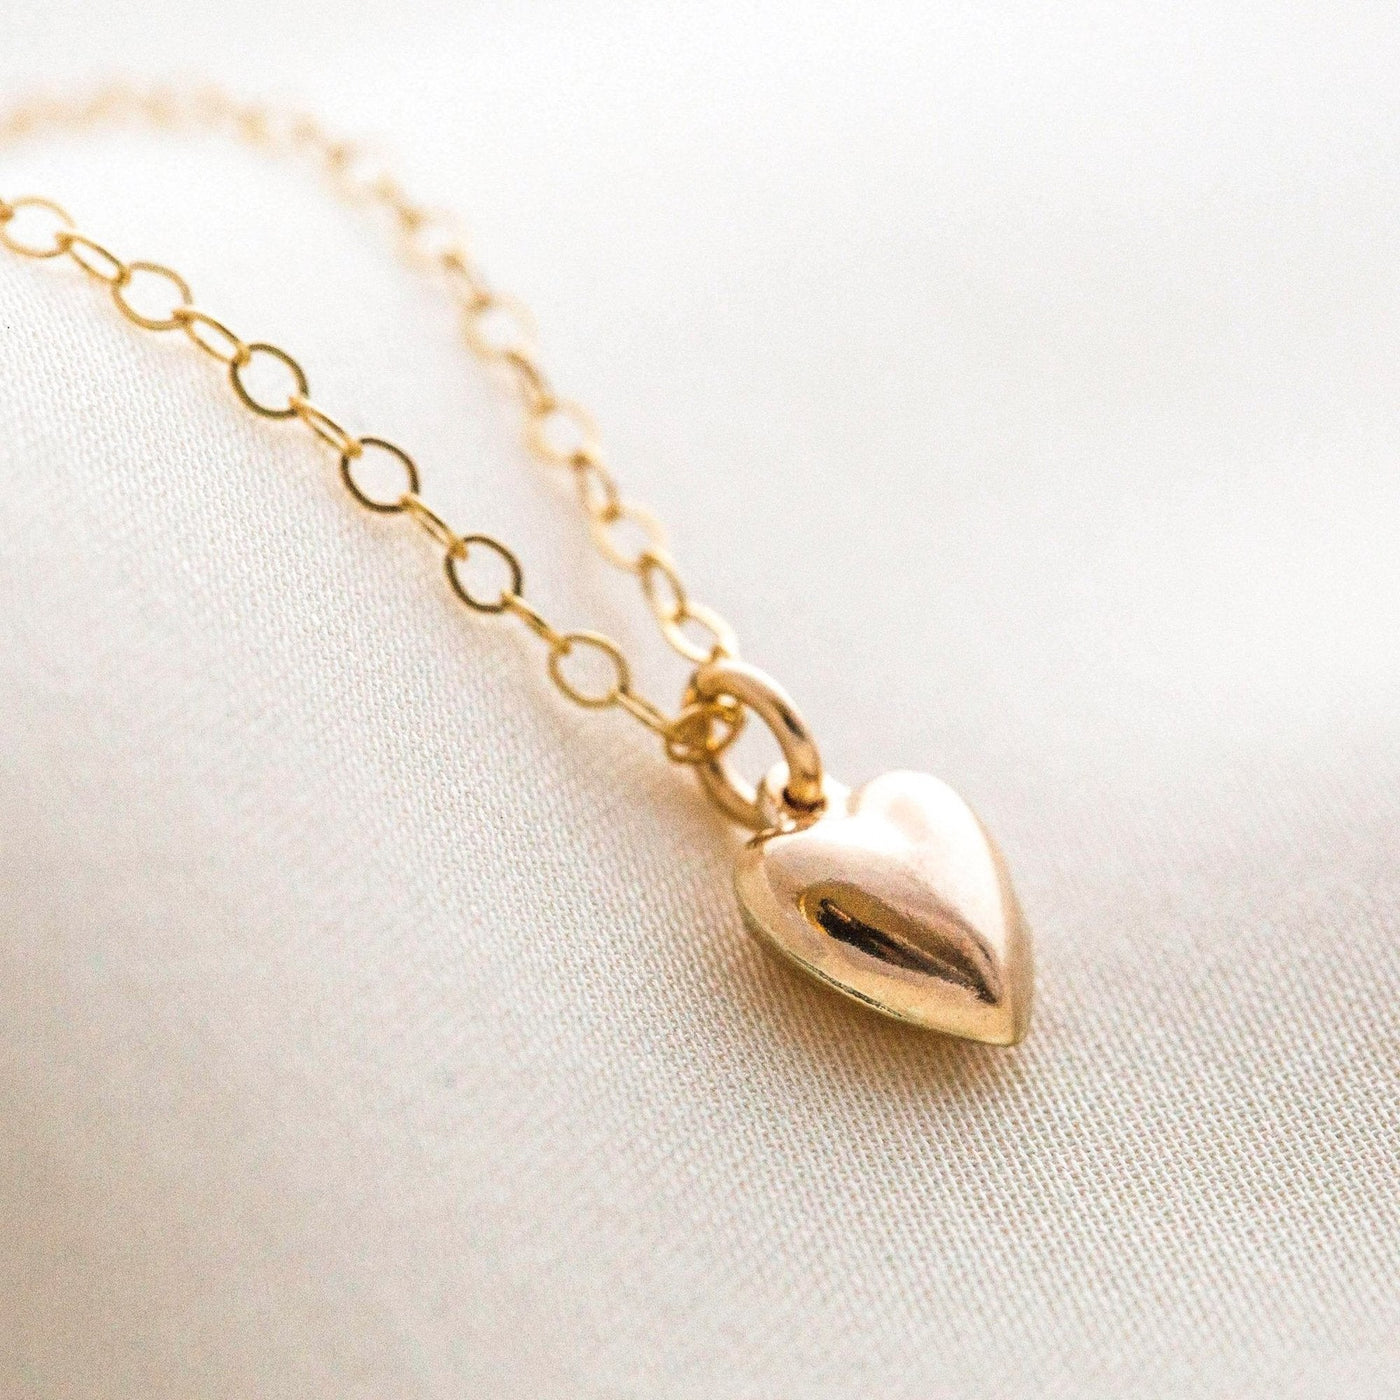 Tiny Heart Necklace by Simple & Dainty Jewelry